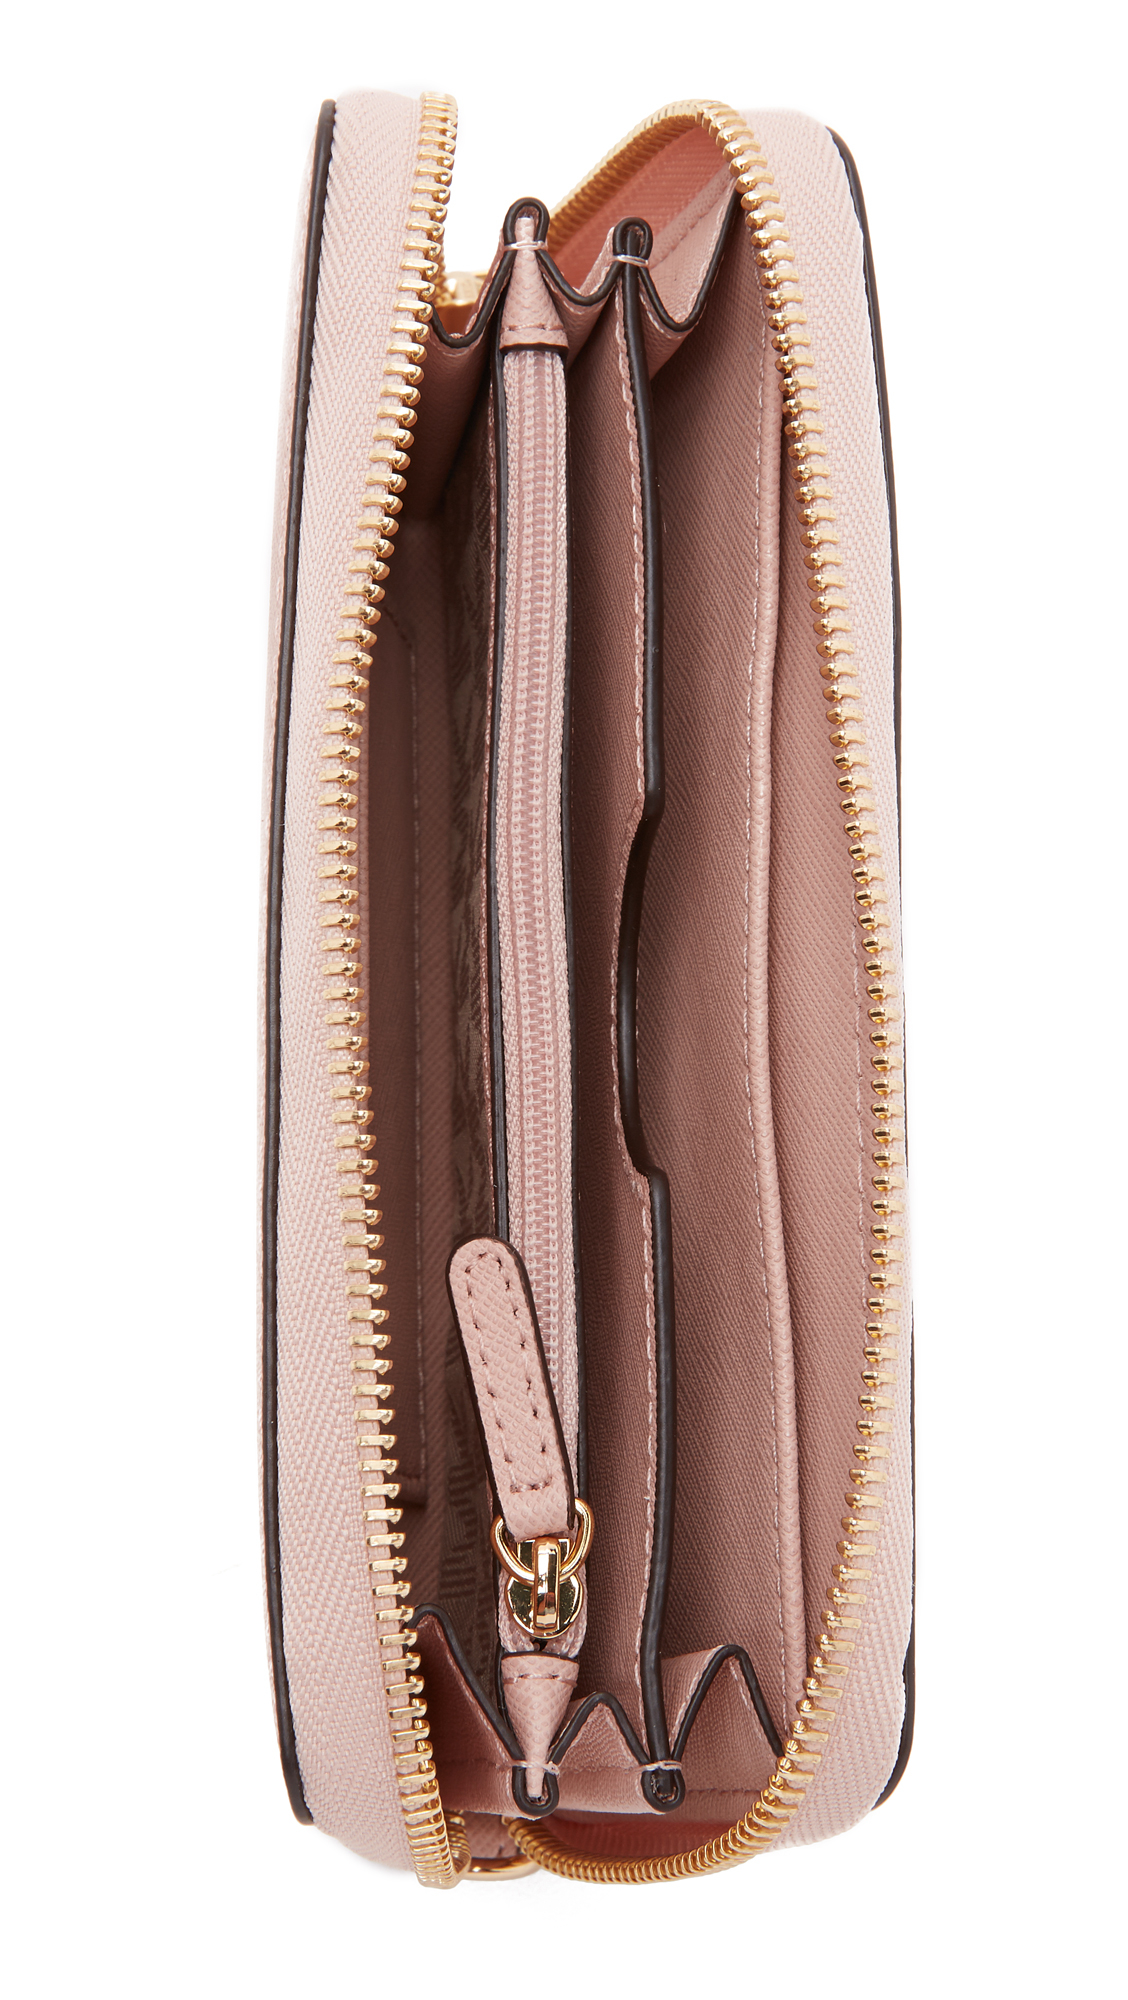 Jet set leather wallet Michael Kors Pink in Leather - 20414074